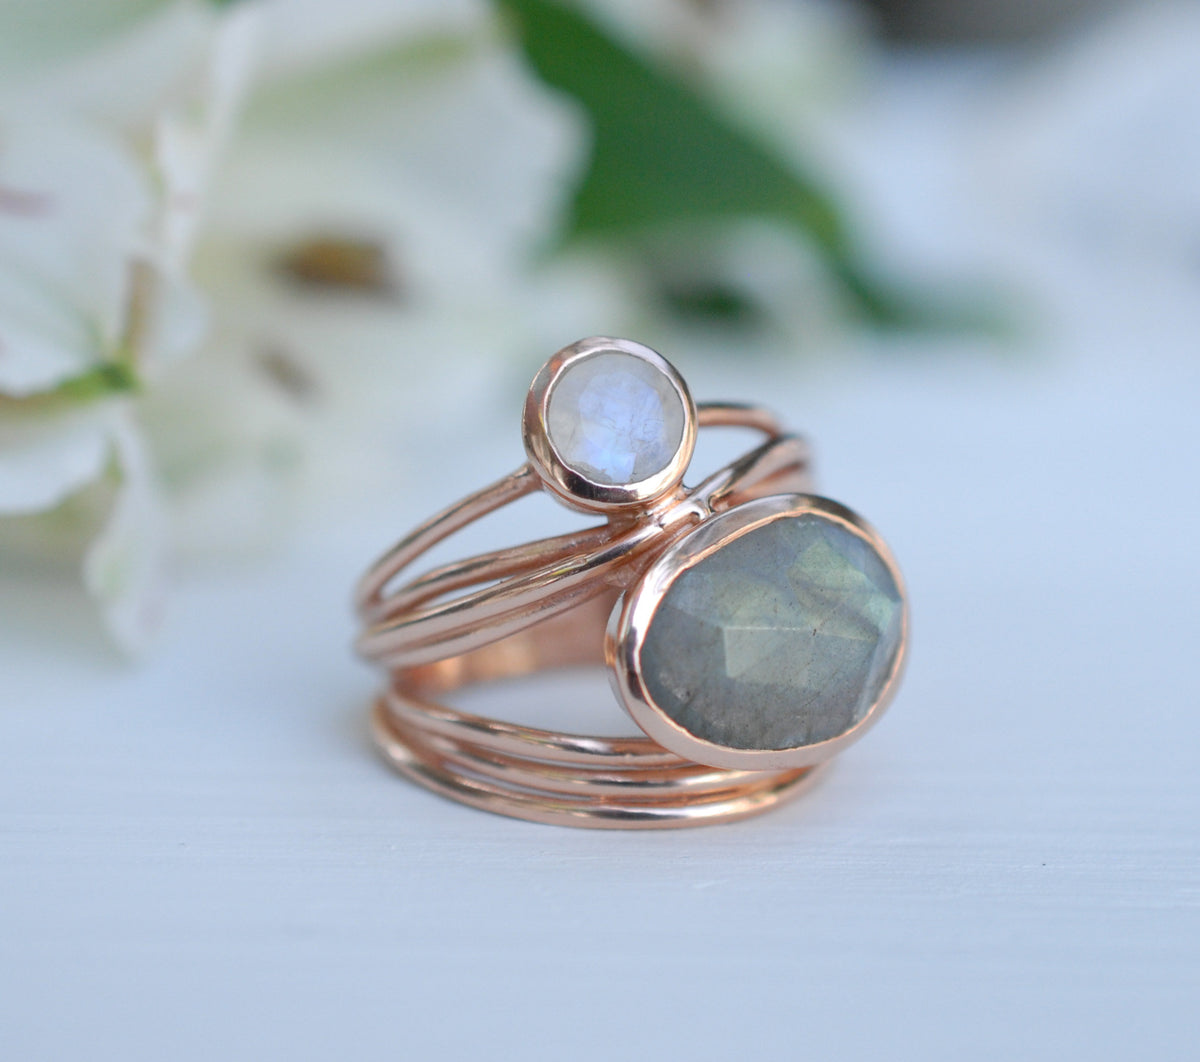 Rose Gold Plated  Ring* Labradorite * Moonstone * Gemstones * Handmade *Statement * Natural * Organic * Gift for her * Jewelry*Bycila*BJR075